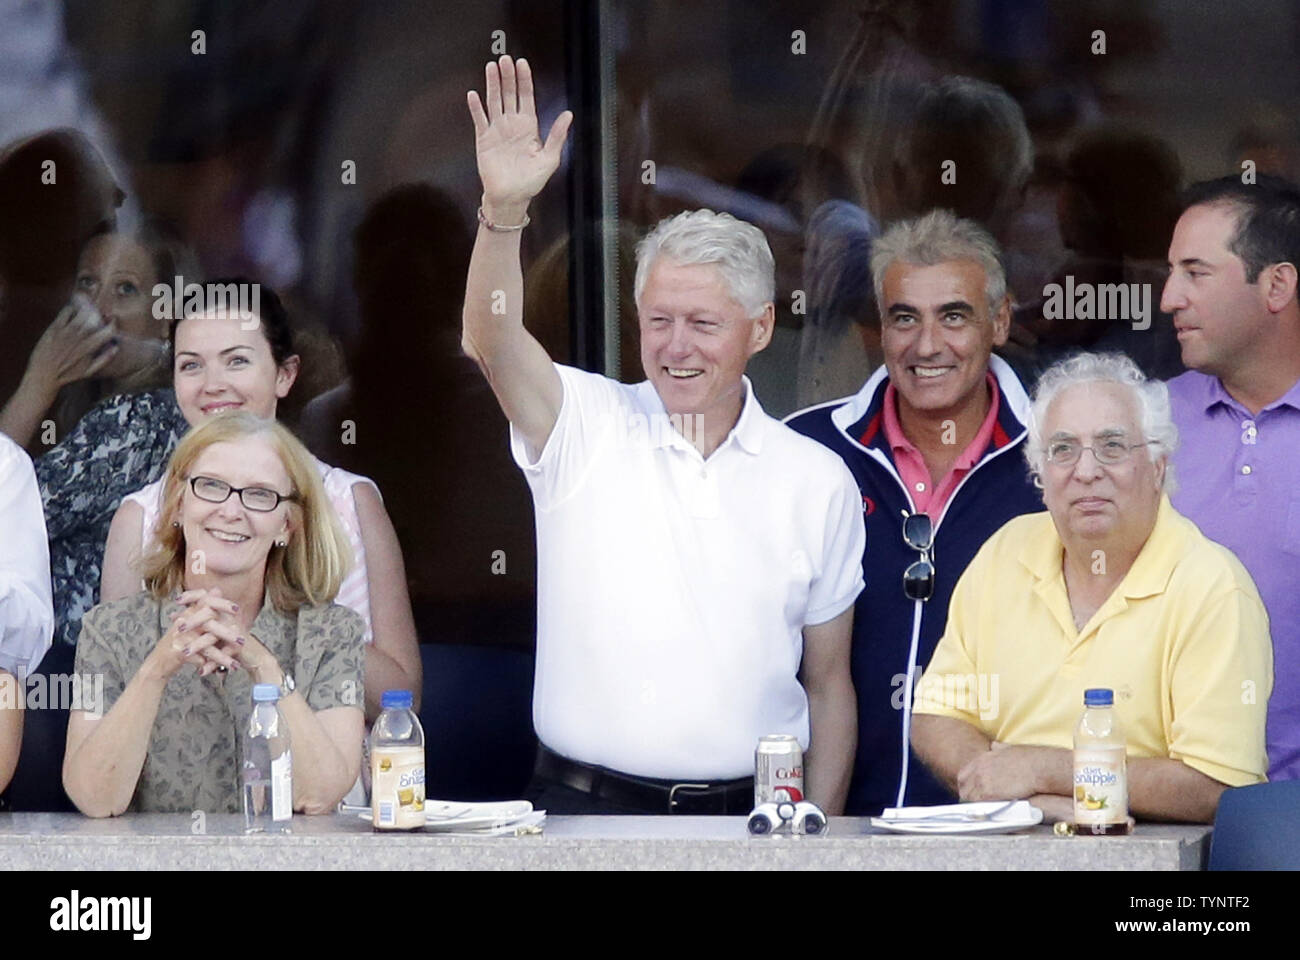 Former US President Bill Clinton watches Serena Williams play Victoria Azarenka of Belarus in the Woman's Final in Arthur Ashe Stadium at the U.S. Open Tennis Championships at the USTA Billie Jean King National Tennis Center in New York City on September 8, 2013. Williams wins her second consecutive U.S. Open Championship by defeating Azarenka 7-5, 6-7, 6-1.   UPI/John Angelillo Stock Photo